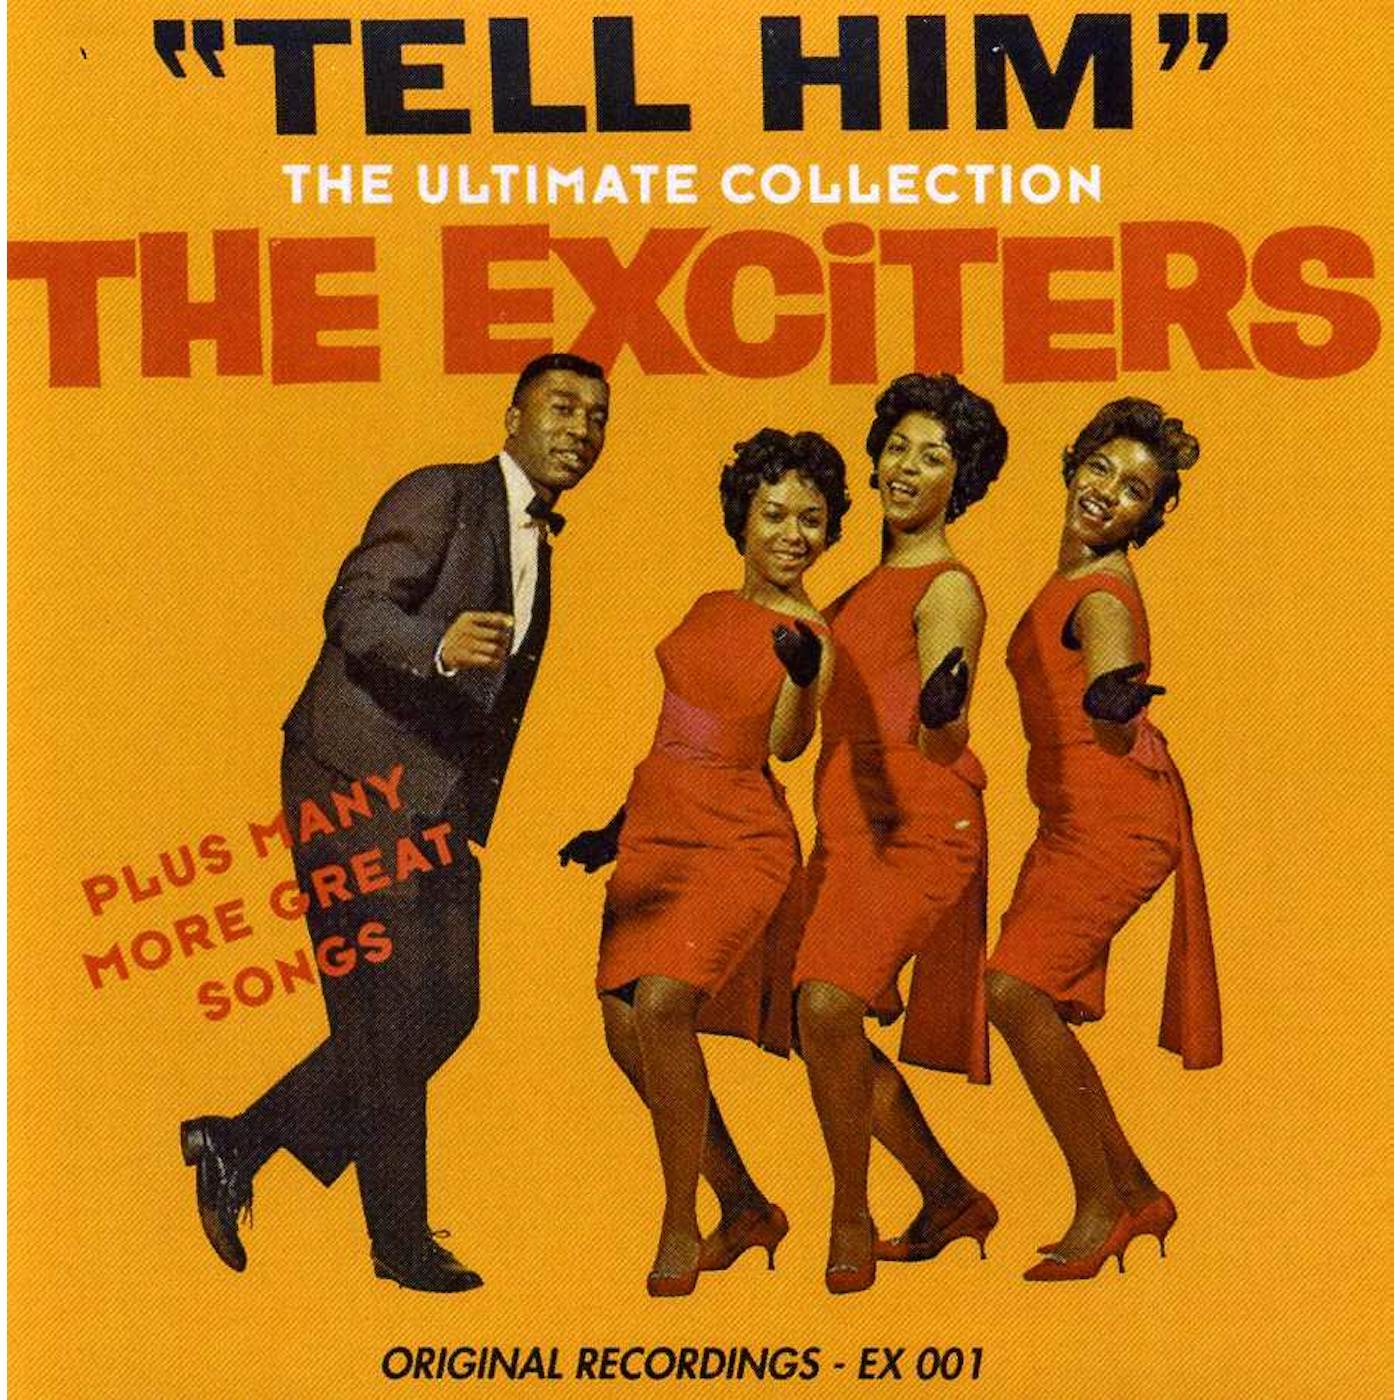 The Exciters ULTIMATE COLLECTION (29 CUTS) CD